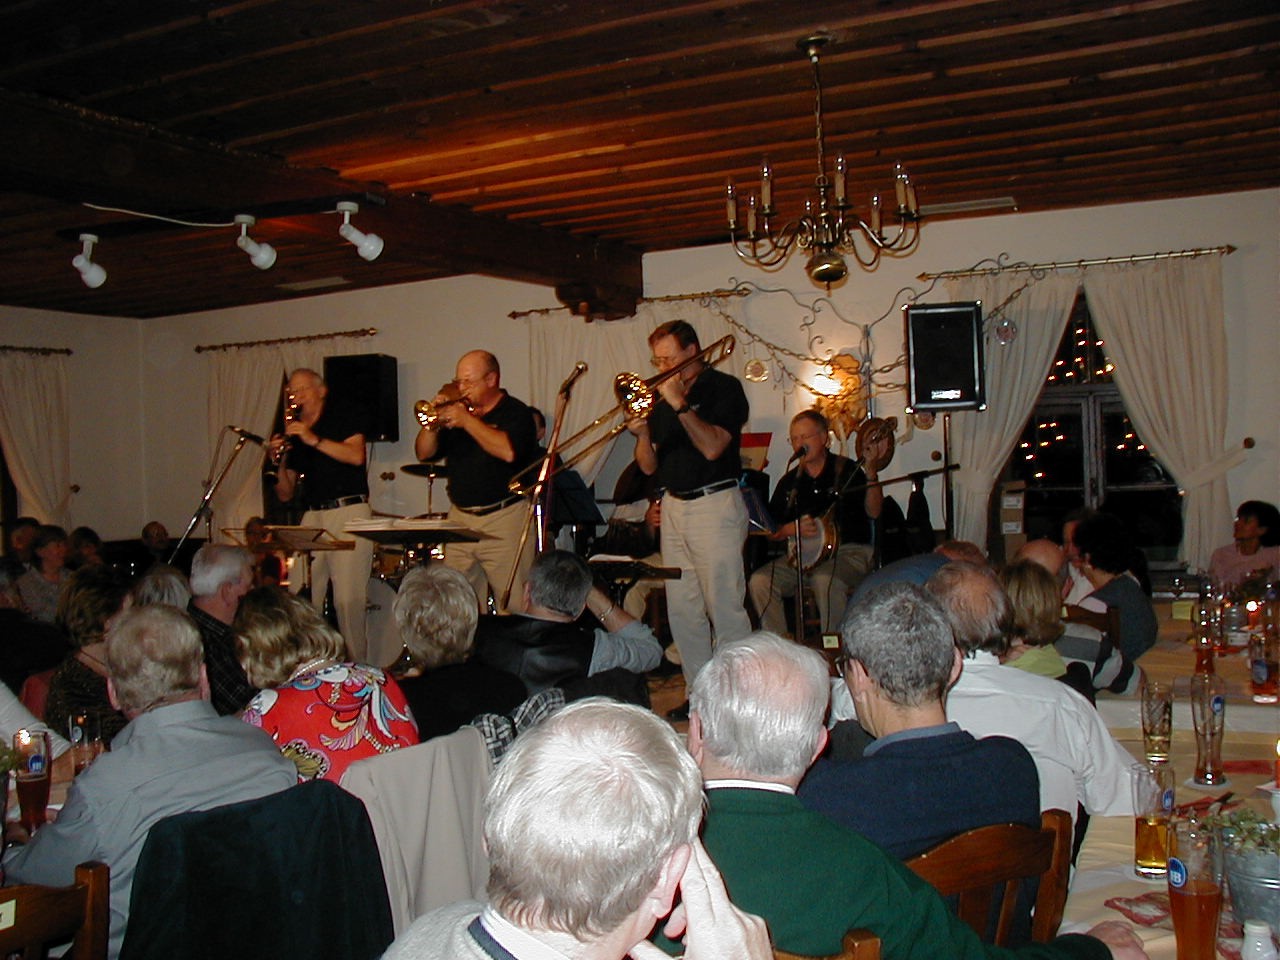 Canamger on stage at Gasthof Bock